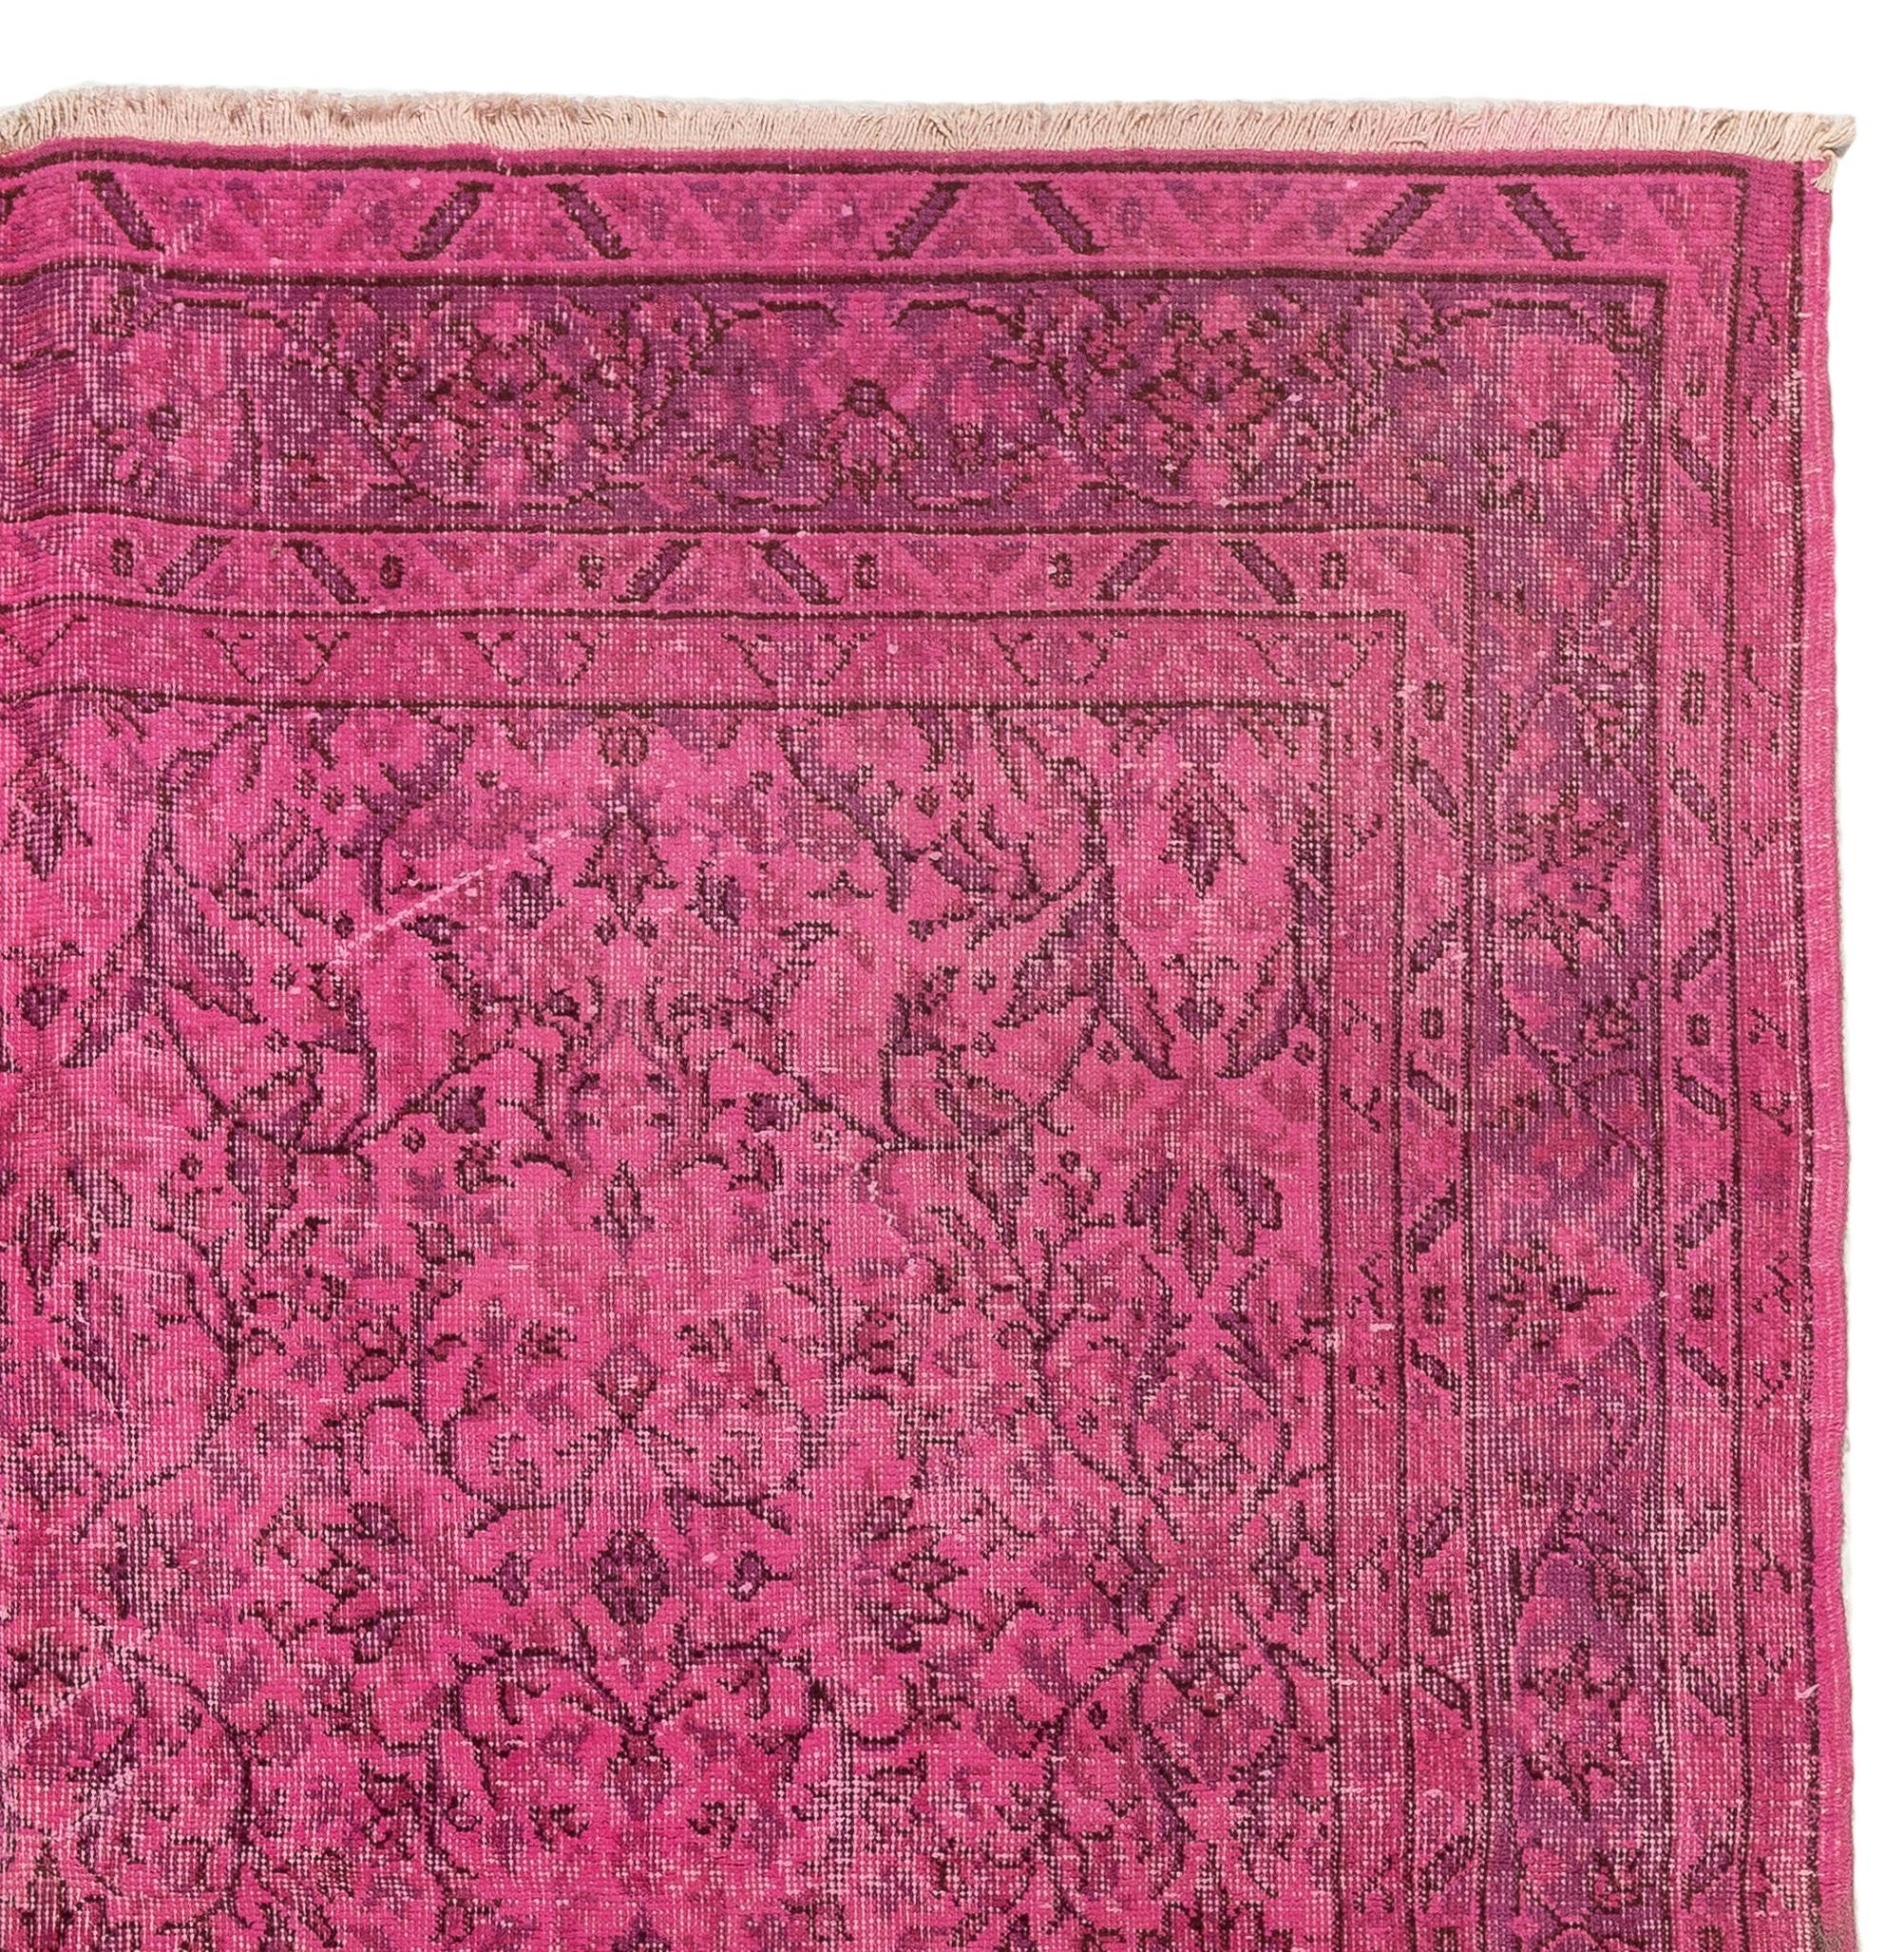 Hand-Woven 6.7x9.7 Ft Vintage Floral Handmade Turkish Rug Overdyed in Pink for Modern Homes